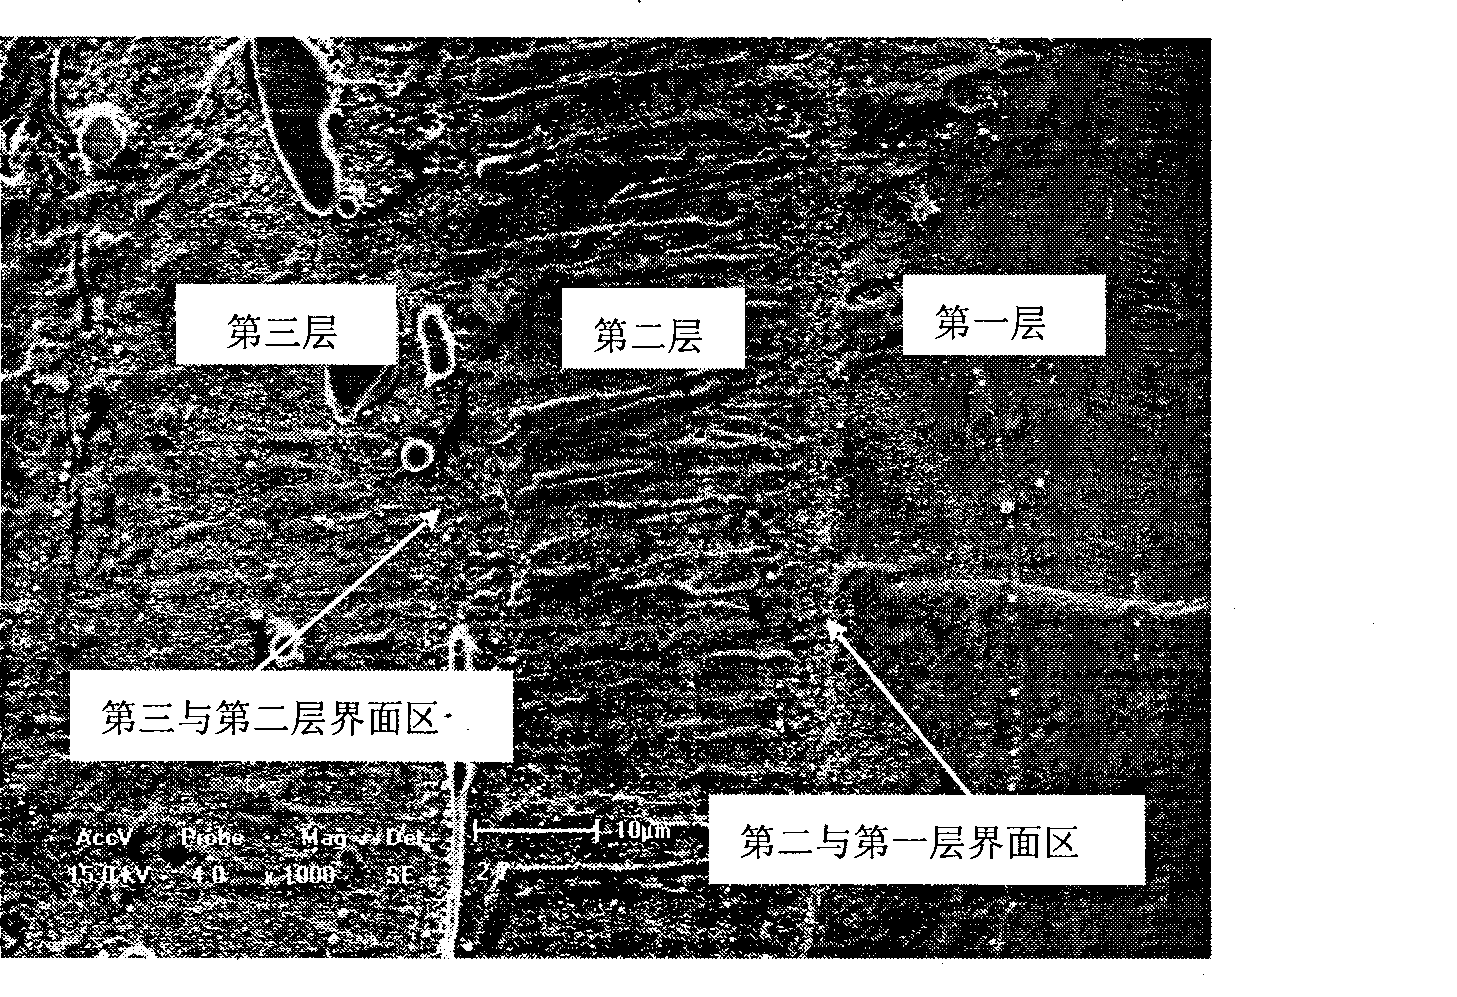 In-situ preparation of cobalt-base alloy gradient coating on aldary surface through laser induction, and method thereof